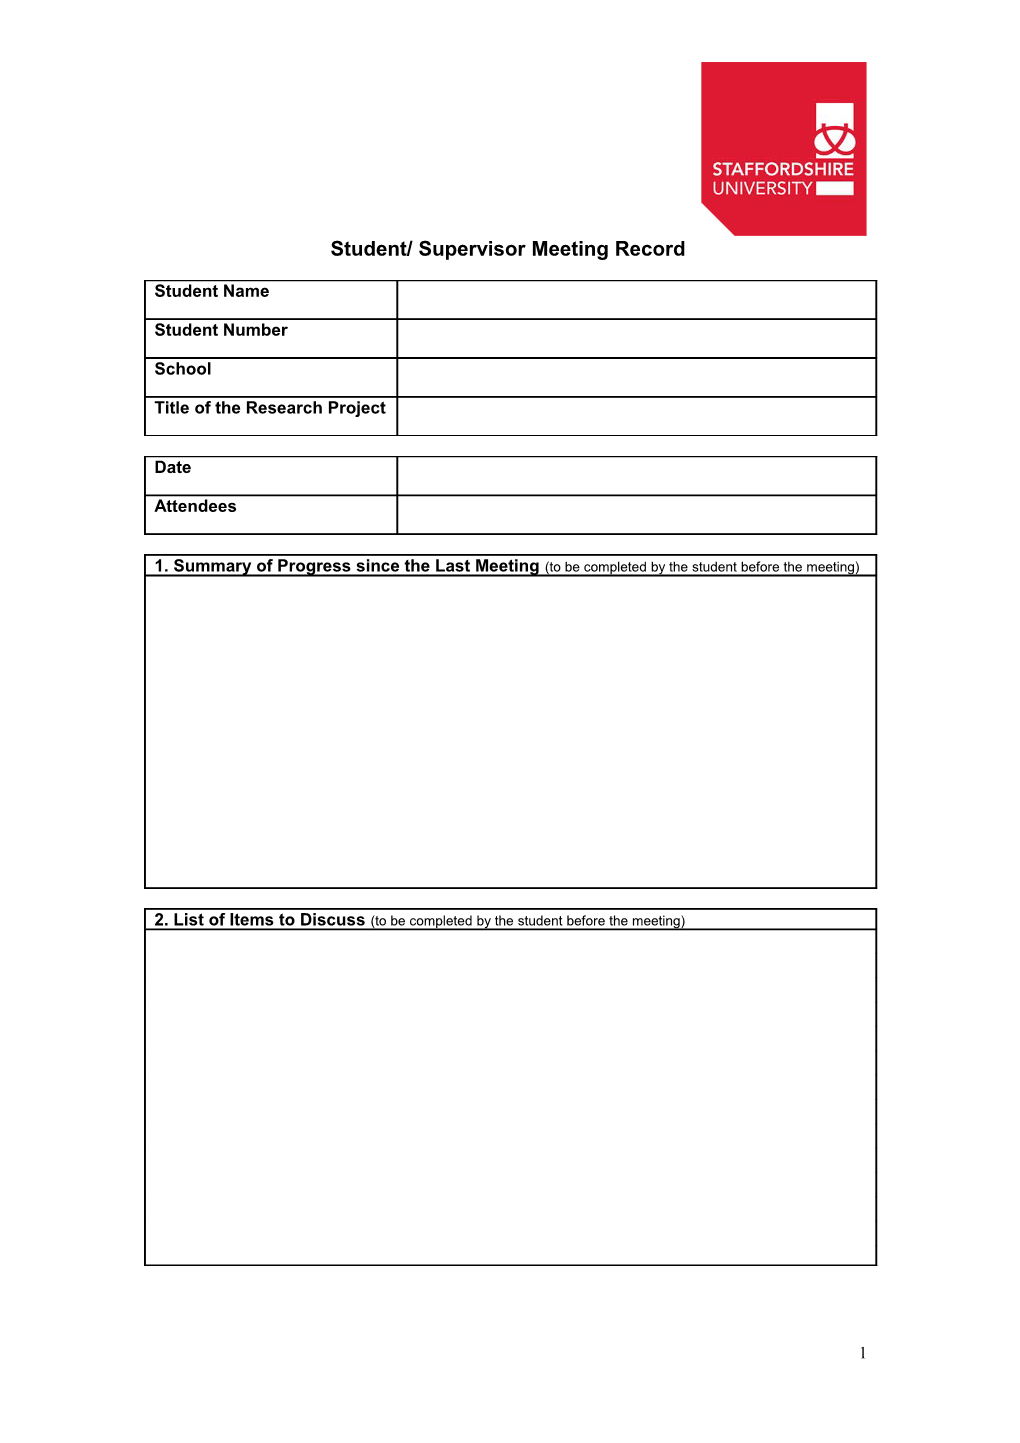 Student/ Supervisor Meeting Record